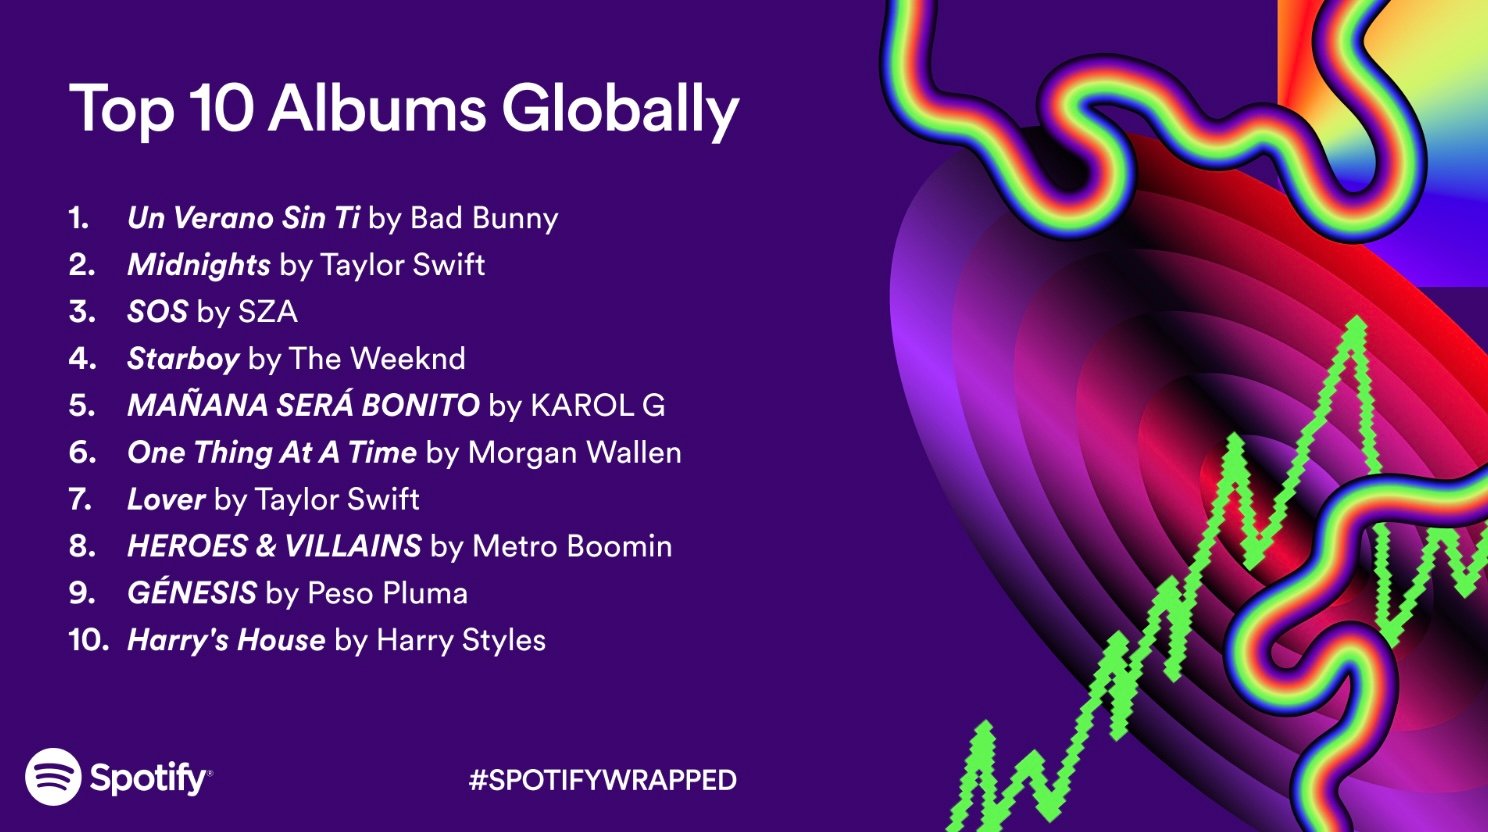 Taylor Swift is the moststreamed artist on Spotify in 2023, with over